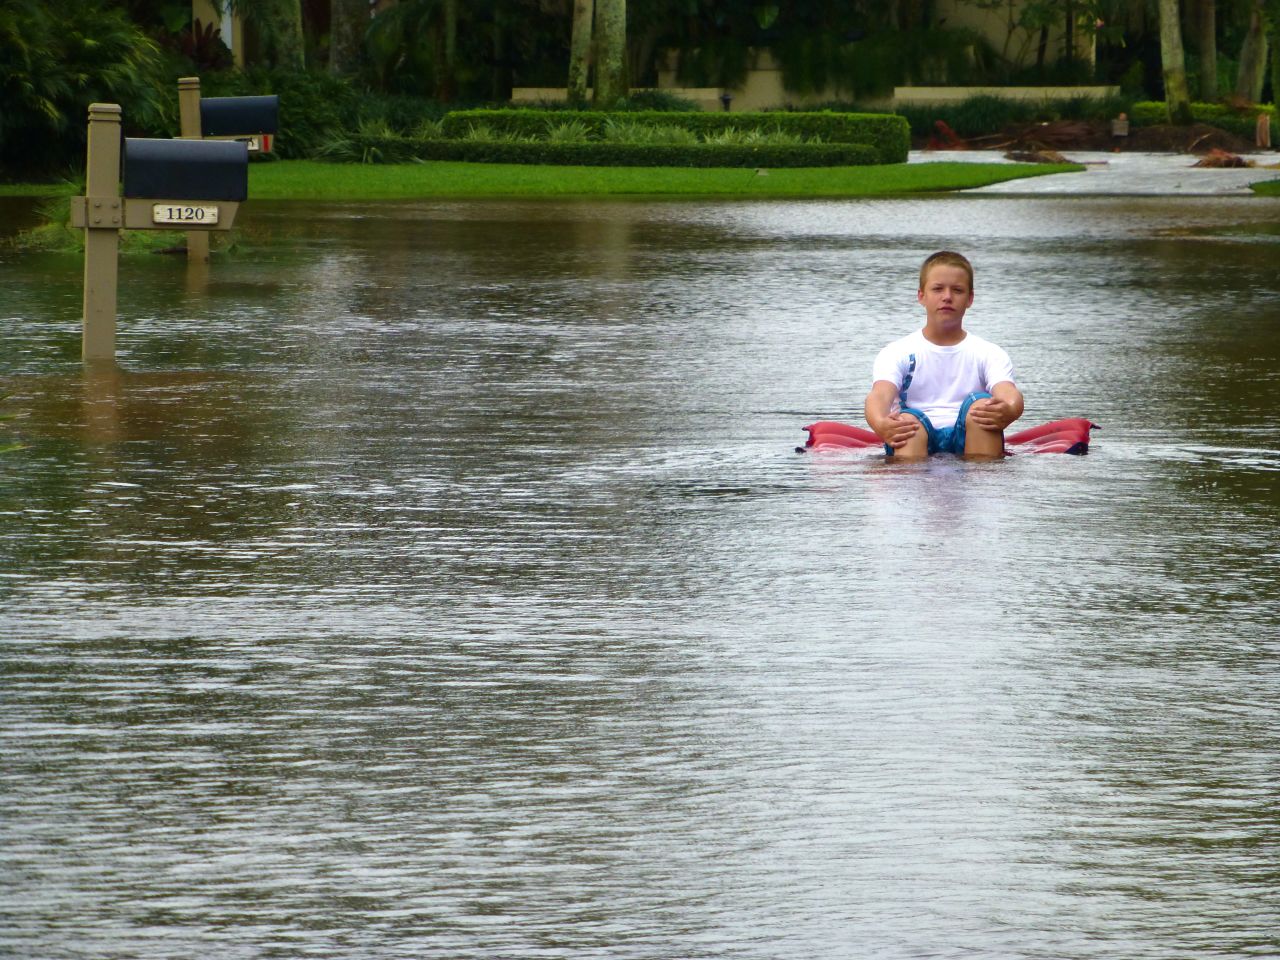 iReporter Liz Yavinsky snapped this picture of a boy floating down a flooded street in West Palm Beach, Florida, on Monday.